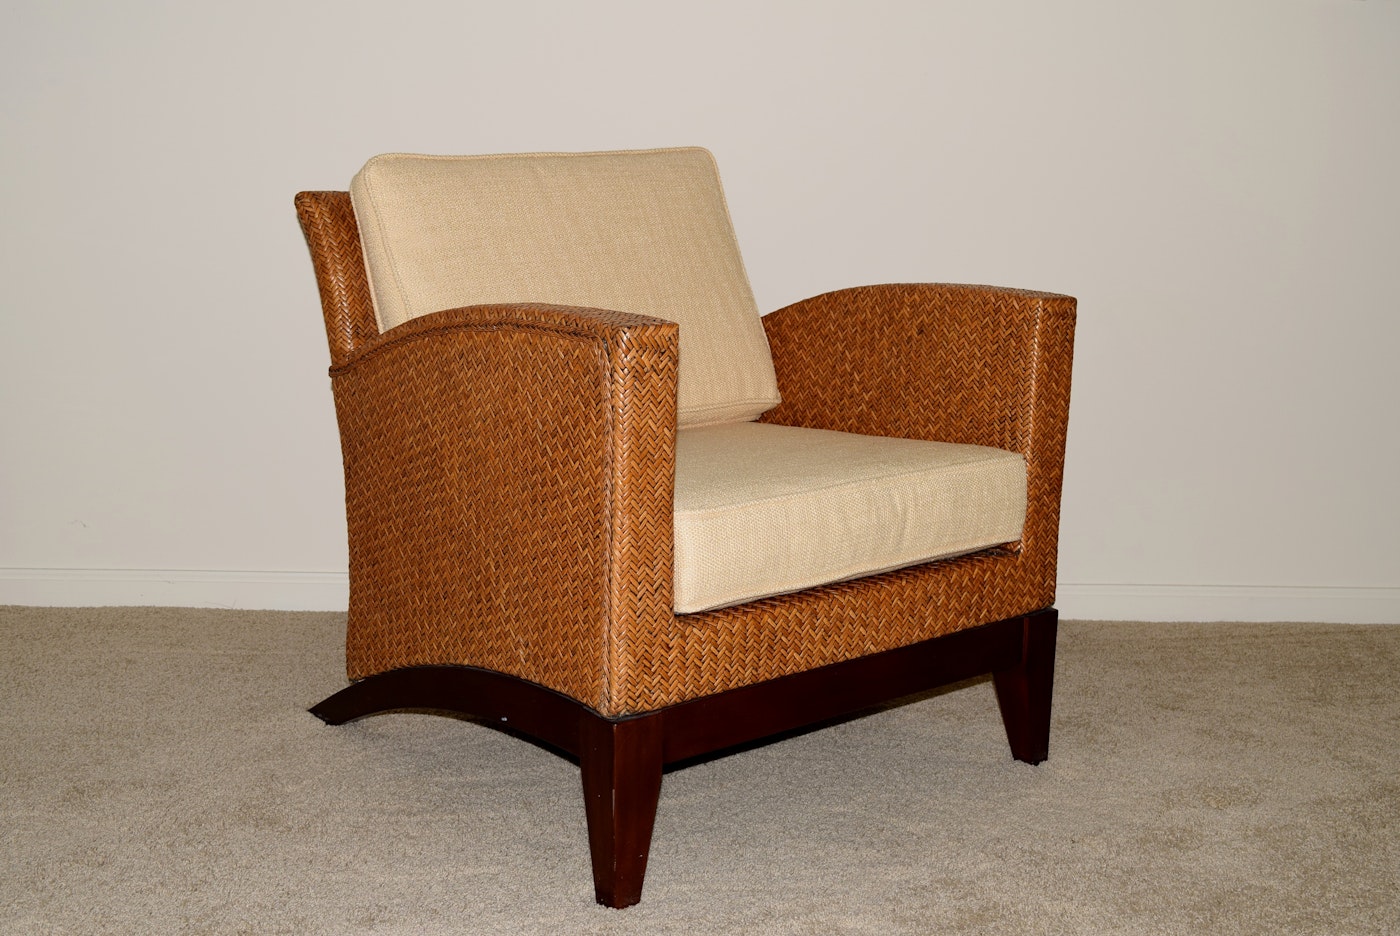 Modern Pier One Imports Rattan Accent Chair | EBTH